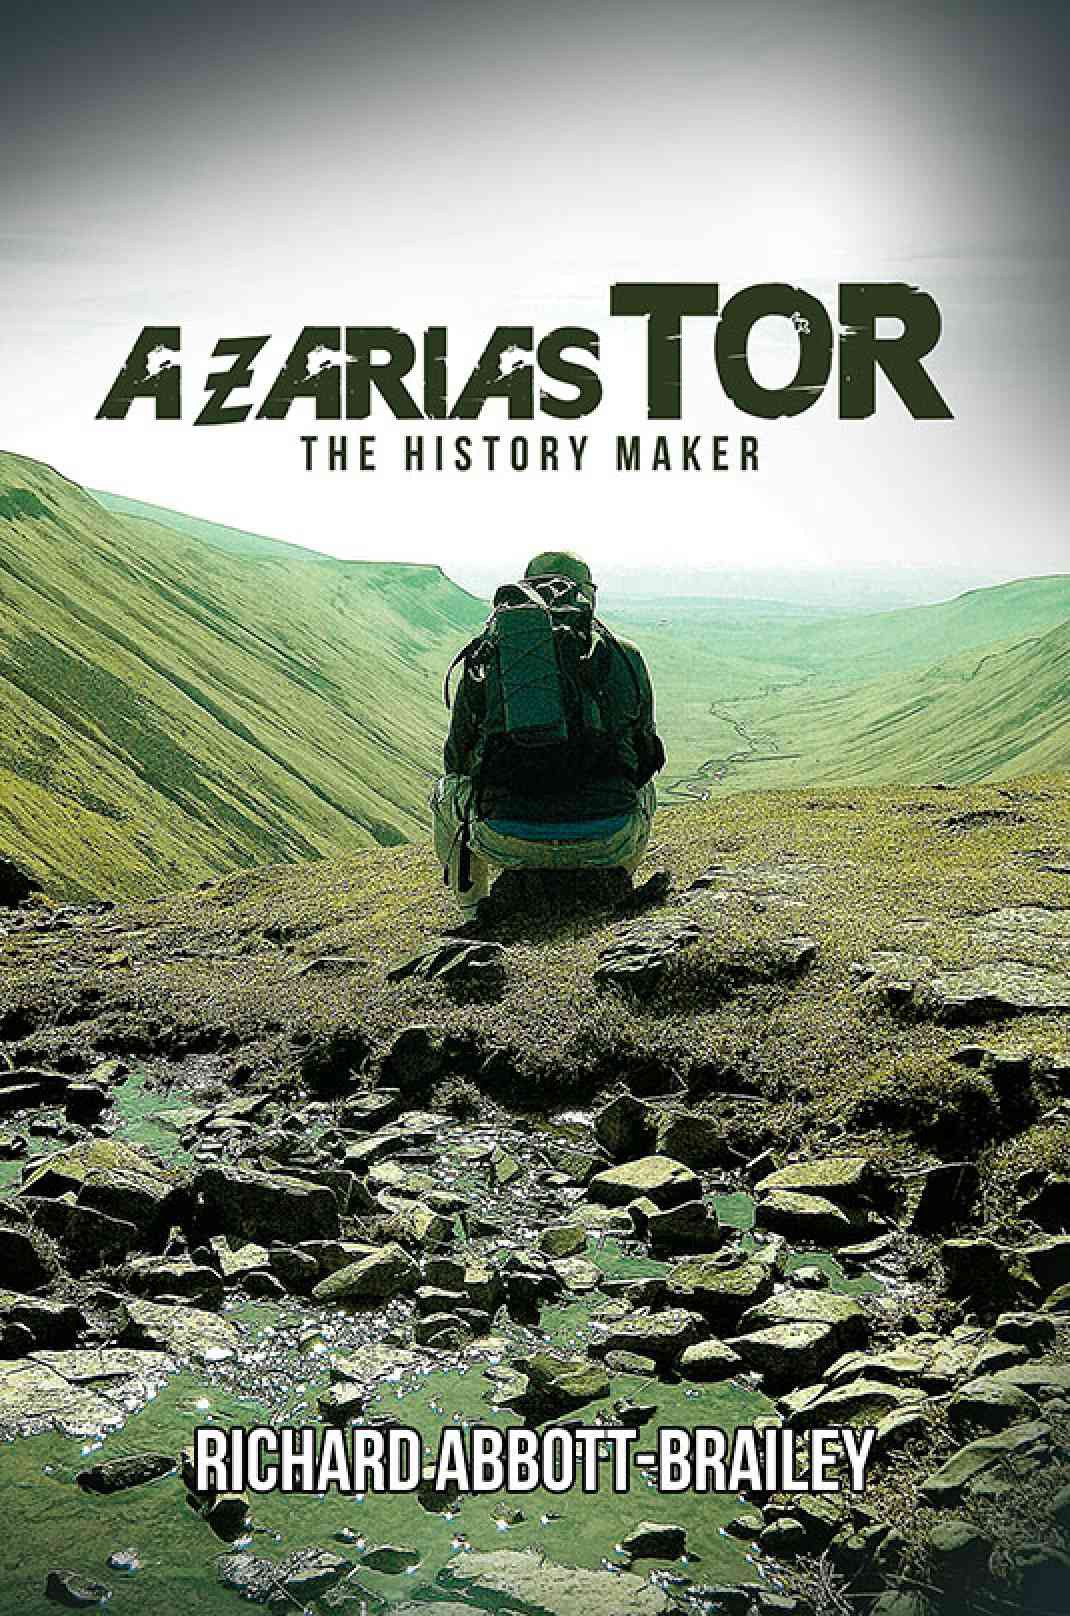 ‘Azarias Tor: The History Maker’ receives a recommendation from Lost in a Book Review